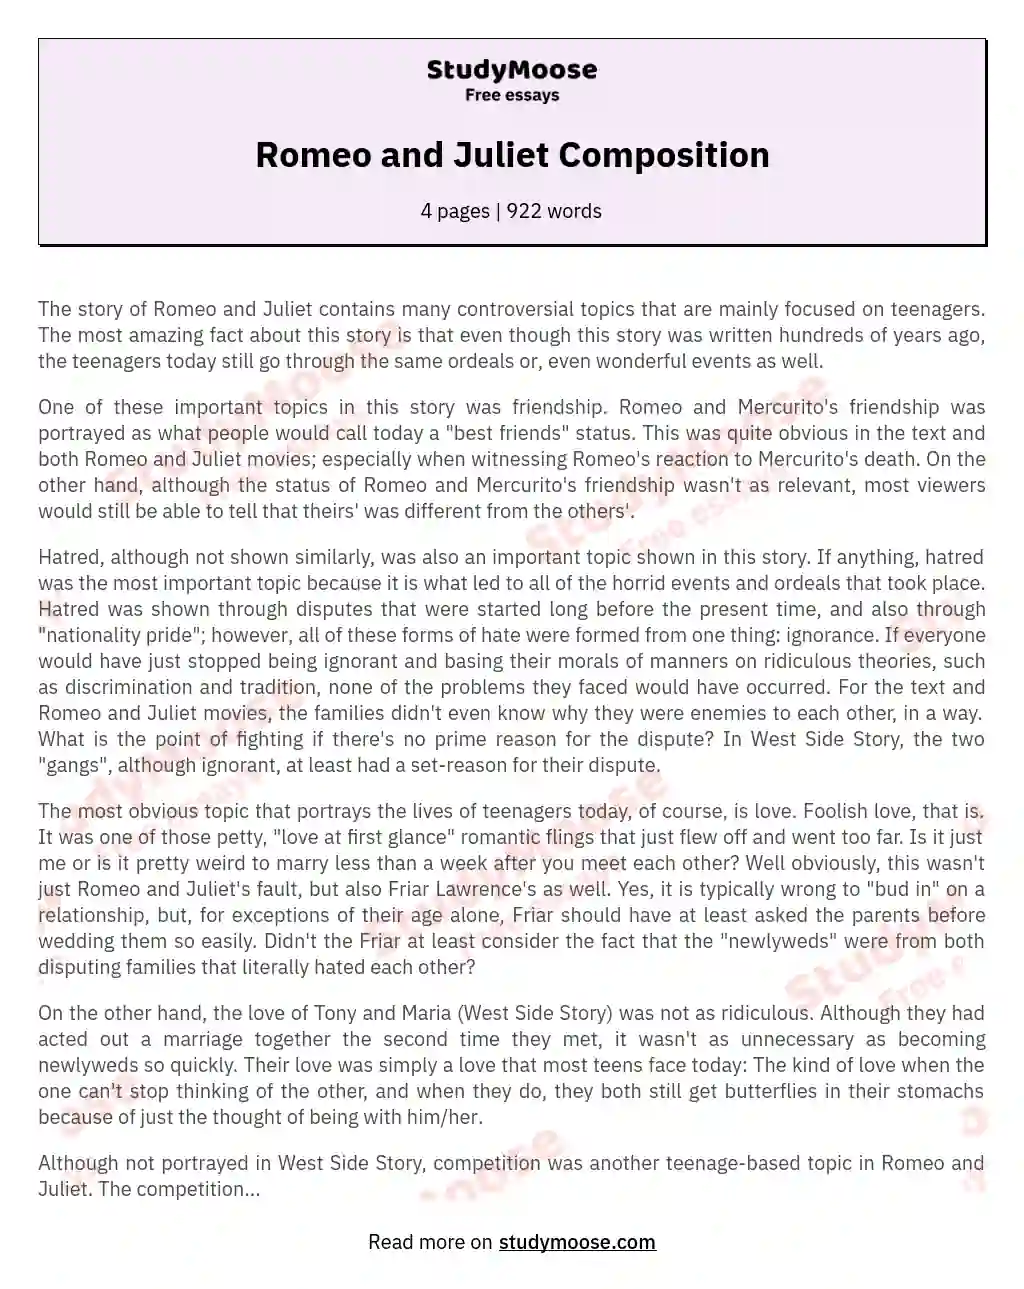 Romeo and Juliet Composition essay